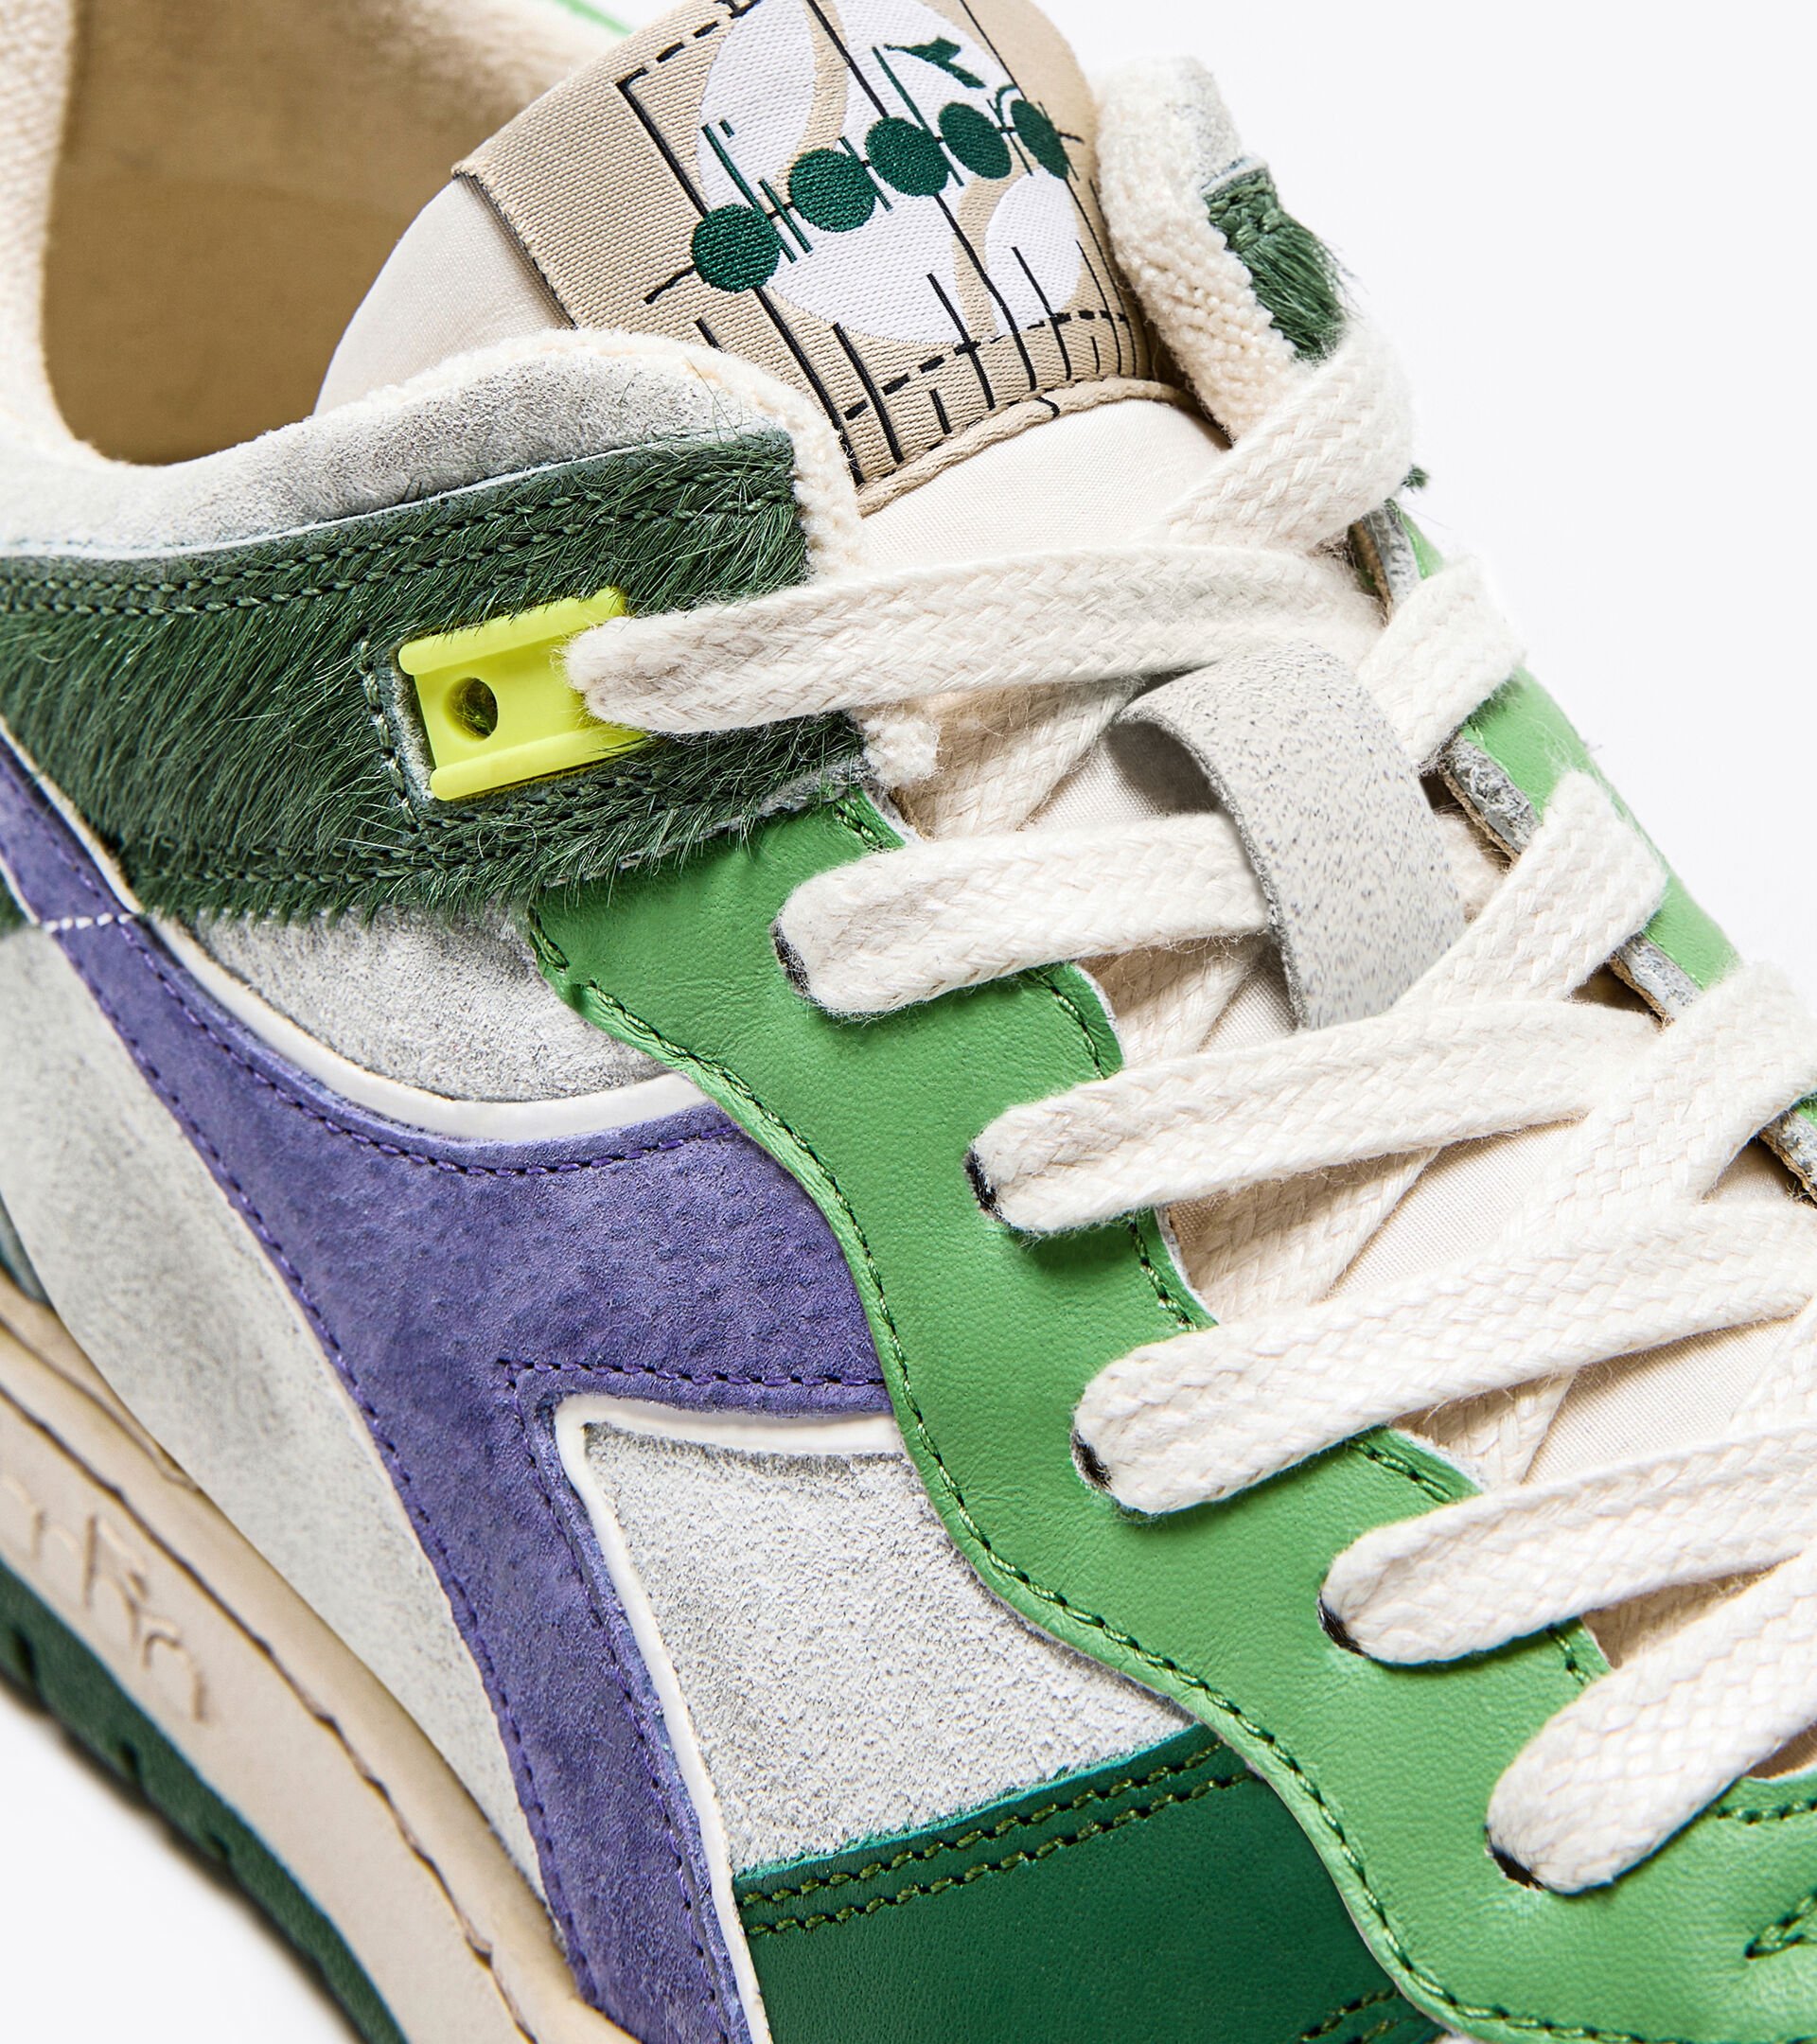 B.560 USED WW ITALIA Heritage shoe - Made In Italy - Gender Neutral -  Diadora Online Store US